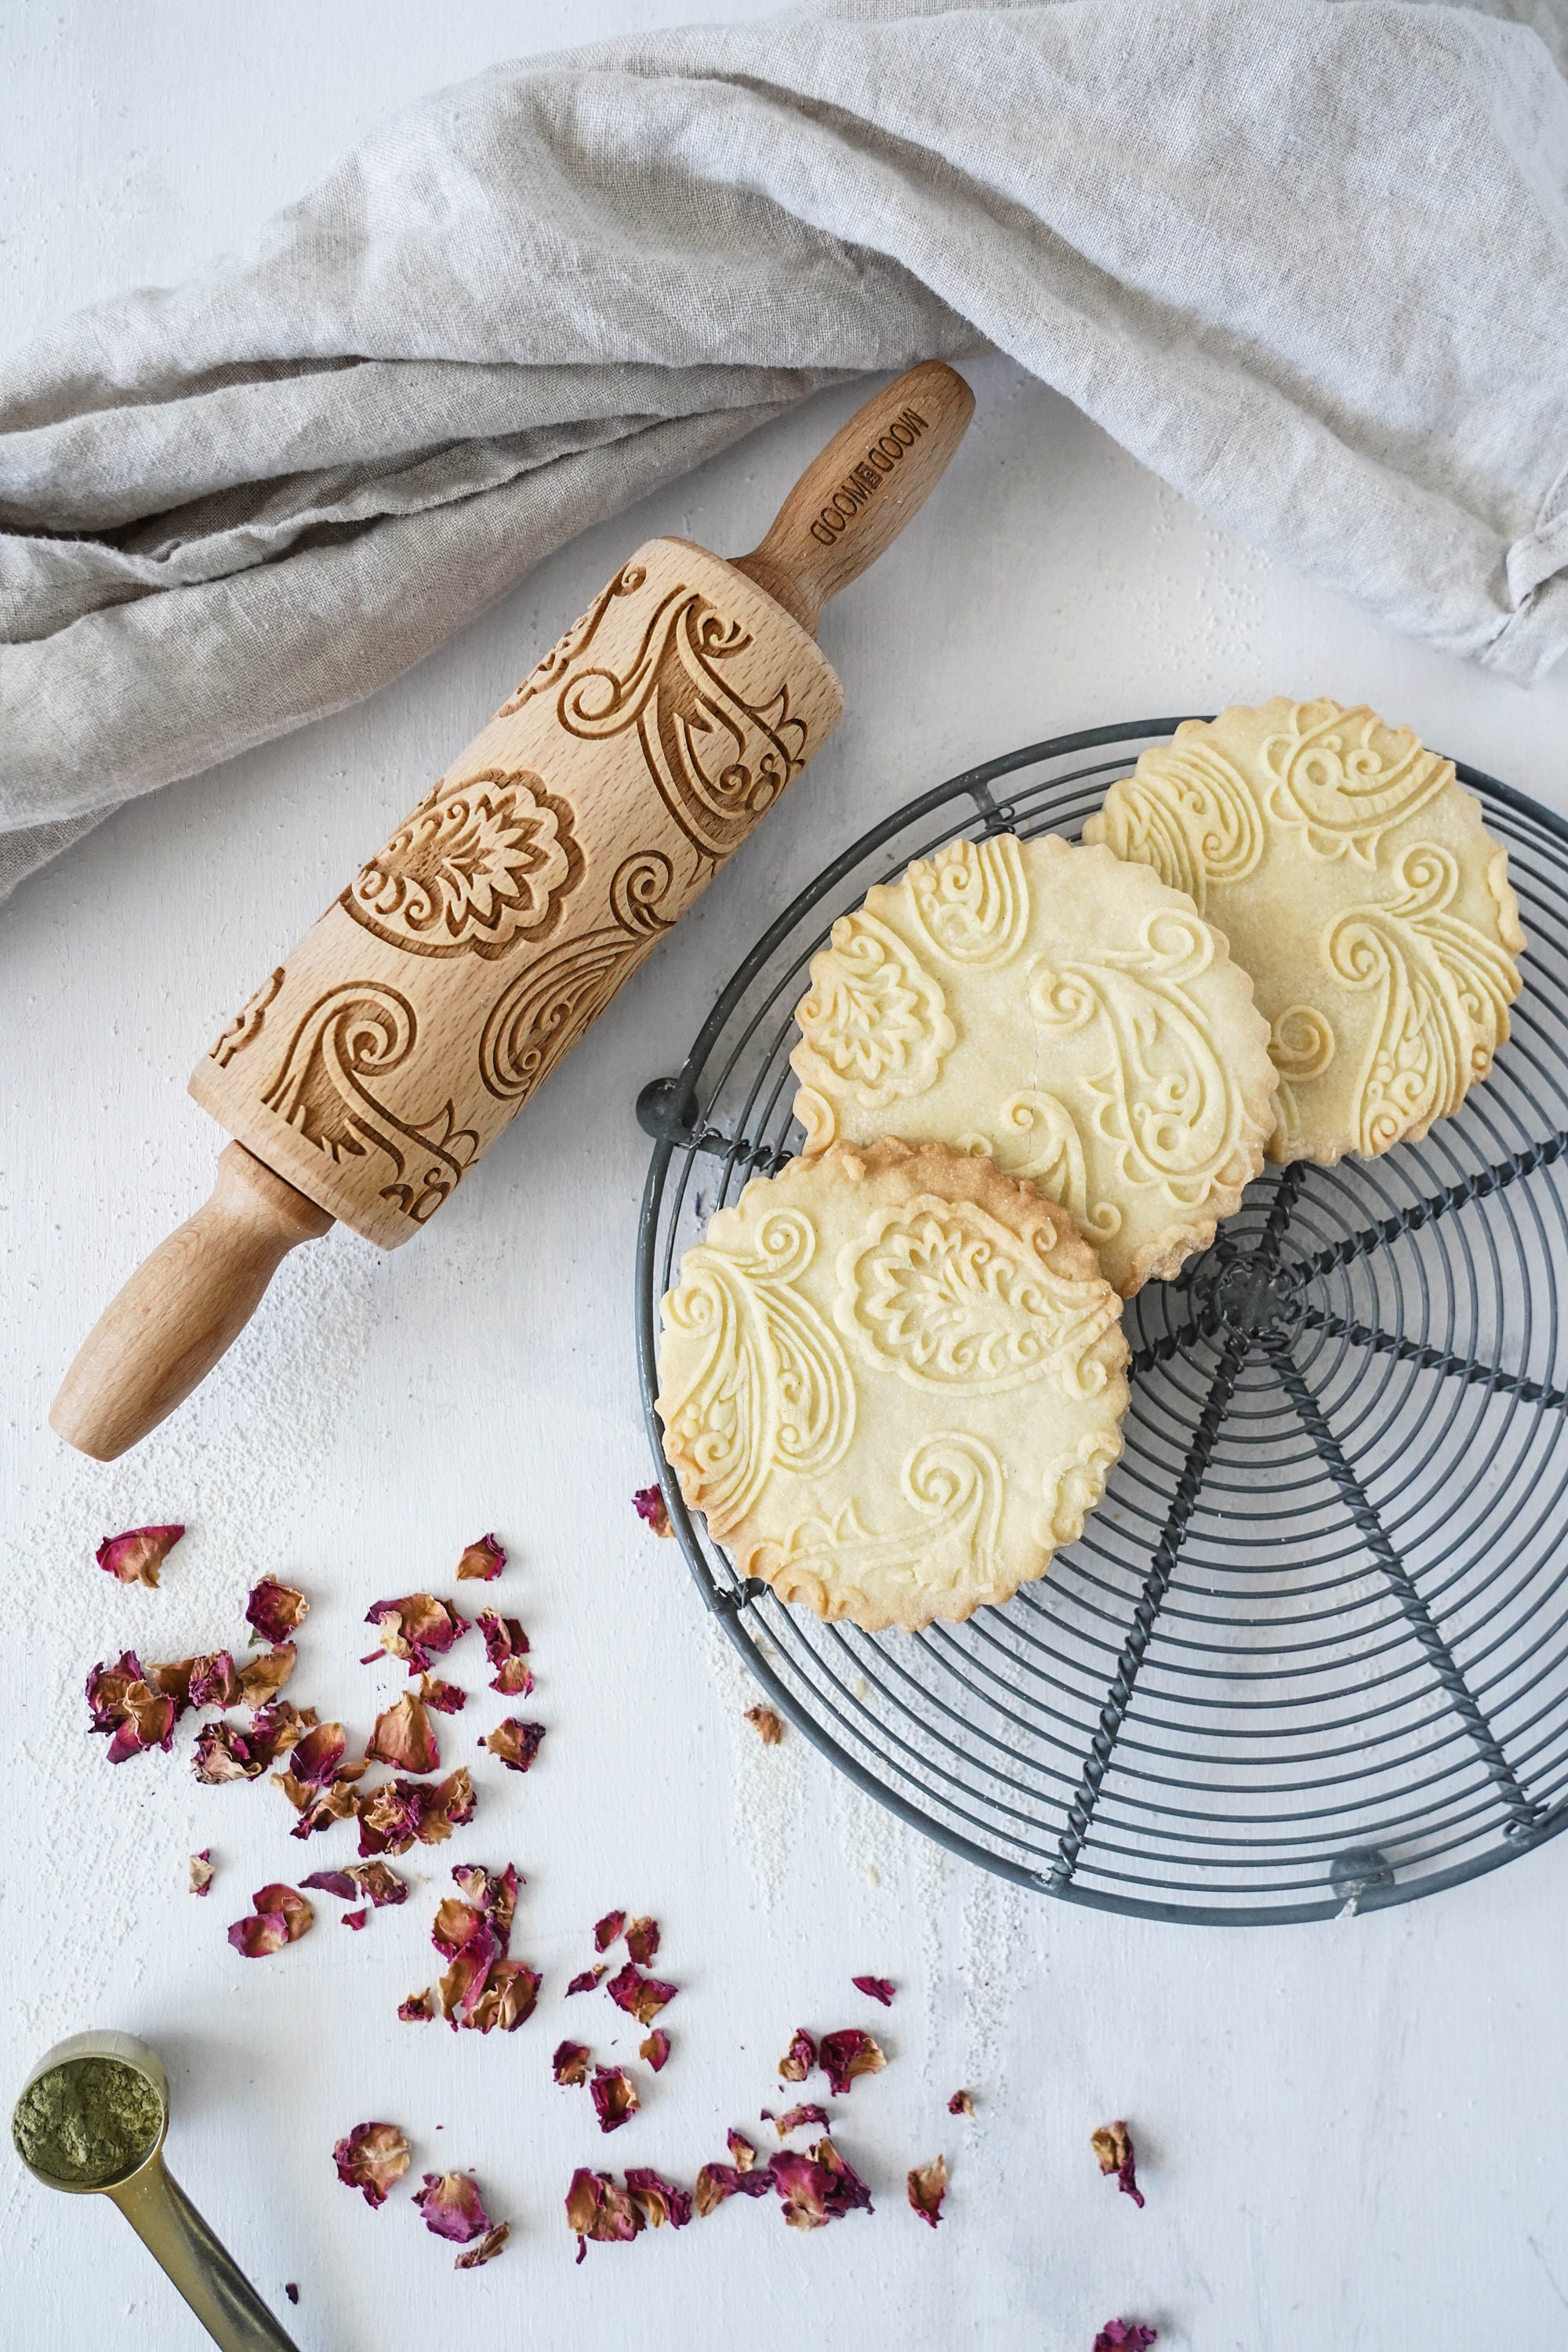 PAISLEY MINI Embossed, Engraved Rolling Pin for Cookies Perfect Gift Idea 